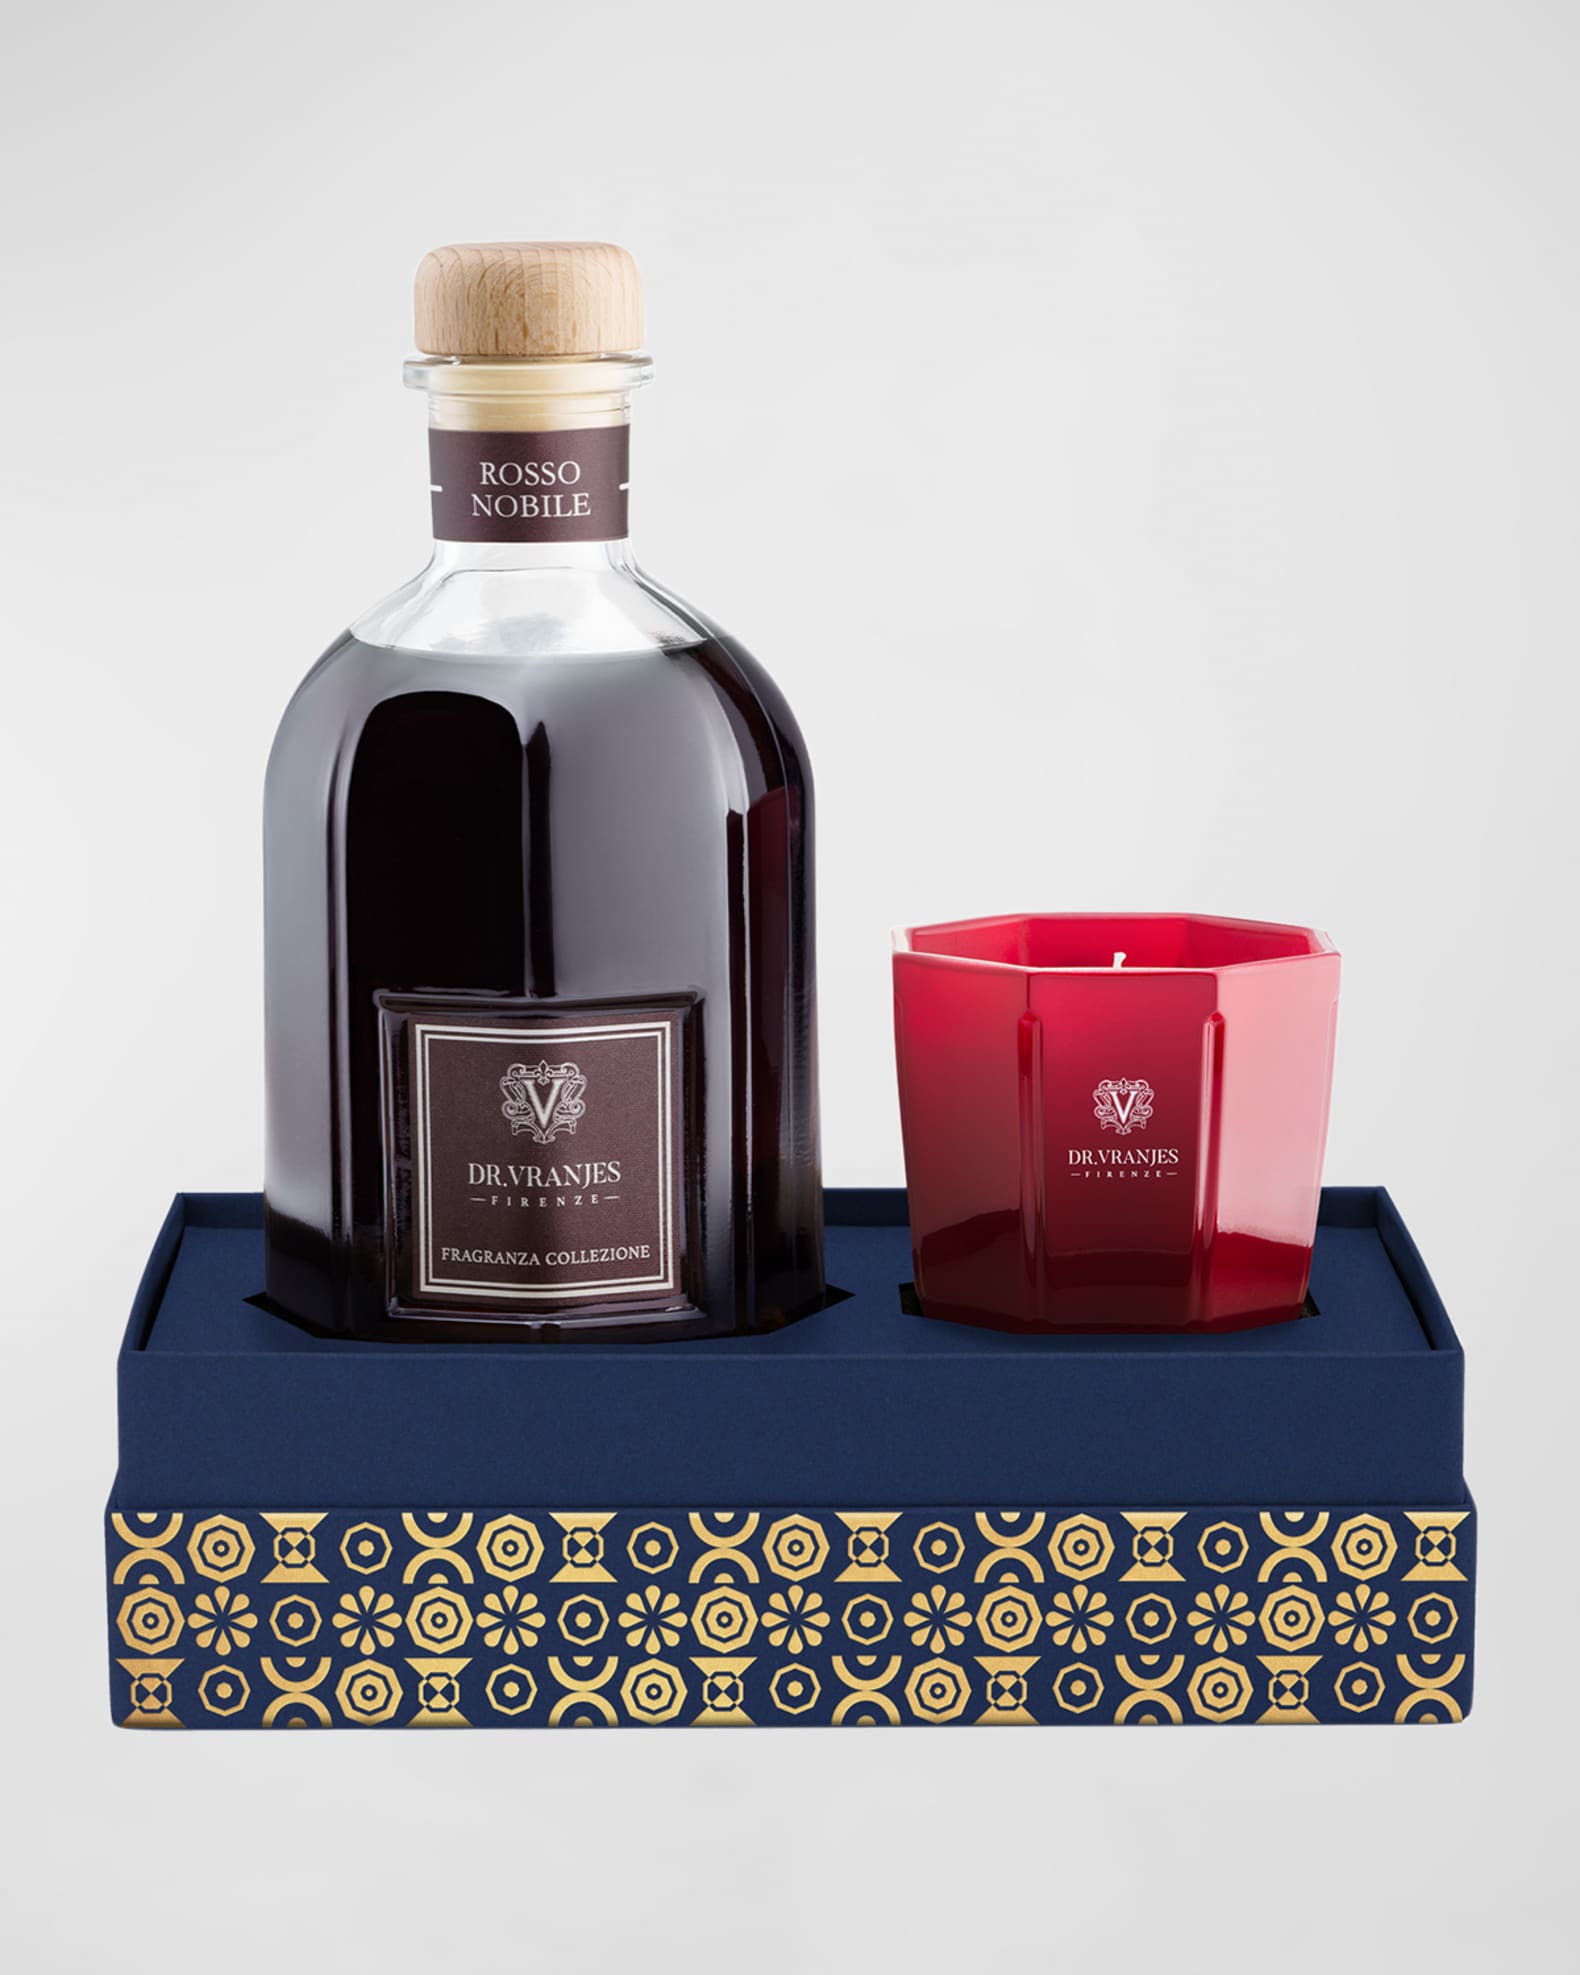 Dr. Vranjes Firenze Rosso Nobile Diffuser + Tourmaline Candle Gift Box